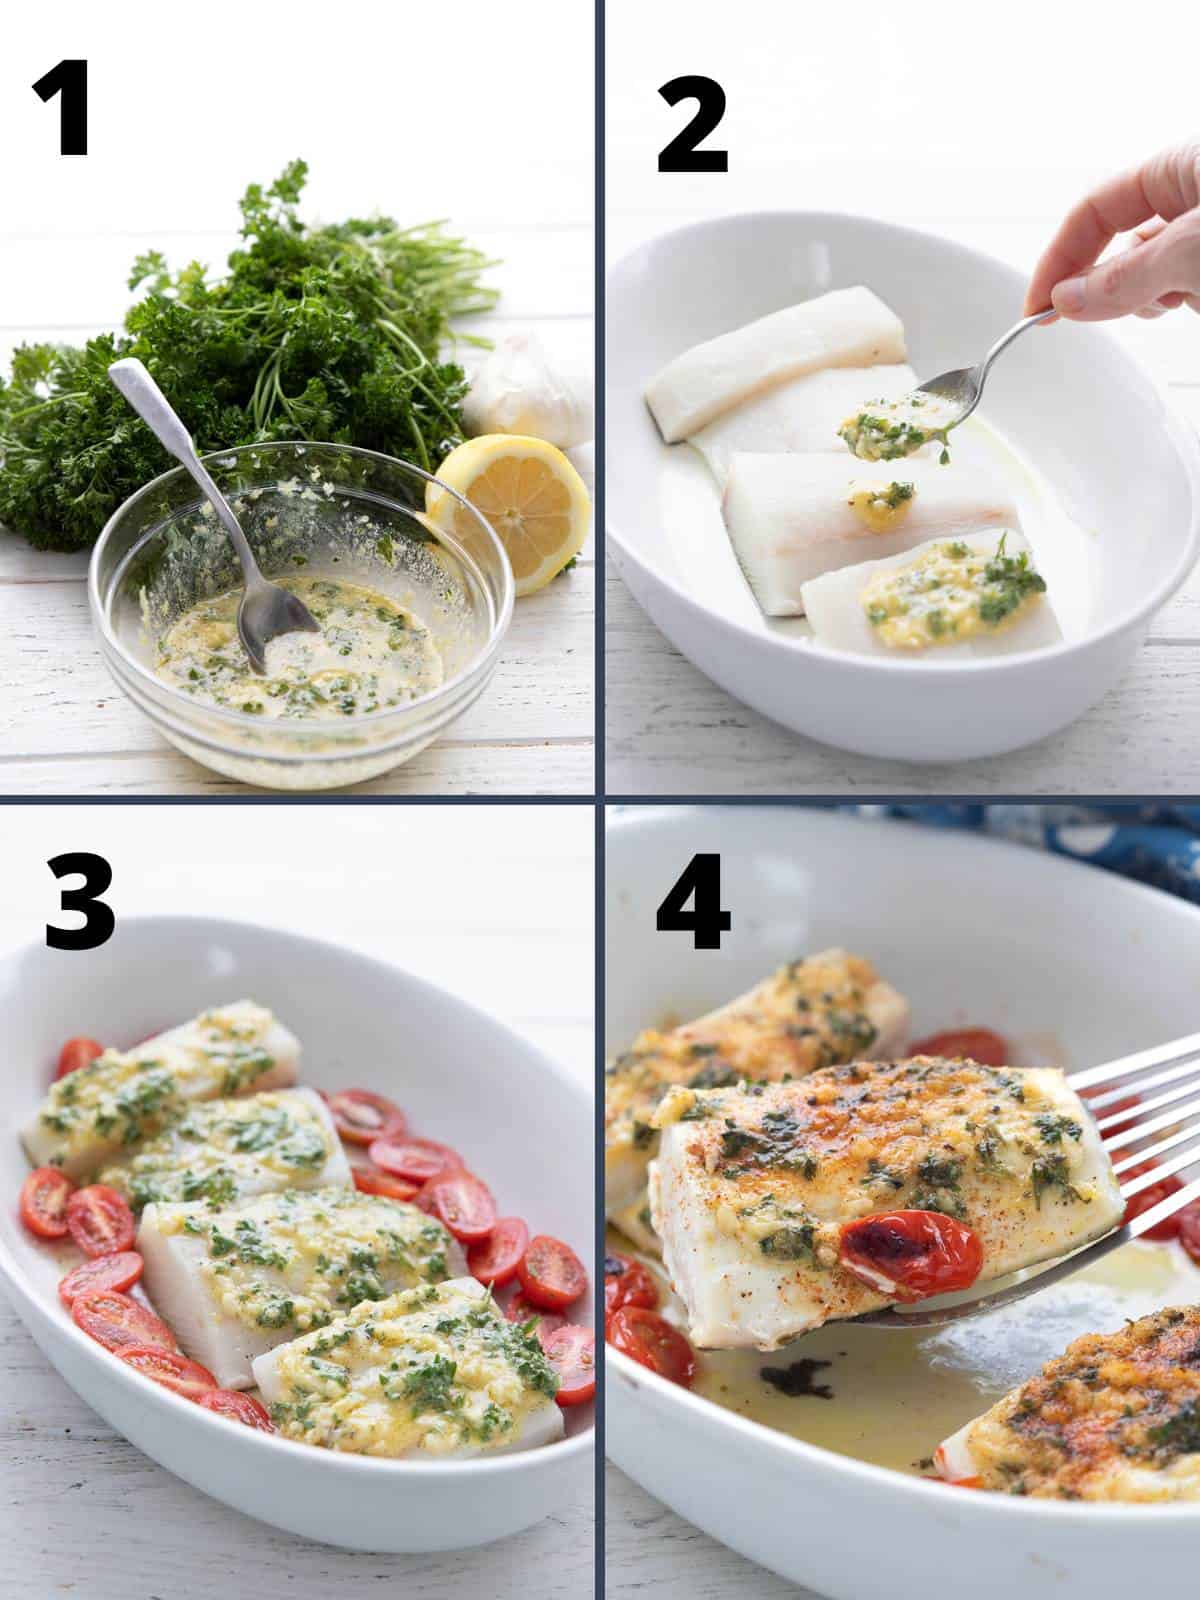 A collage of four images showing the steps for making baked halibut.